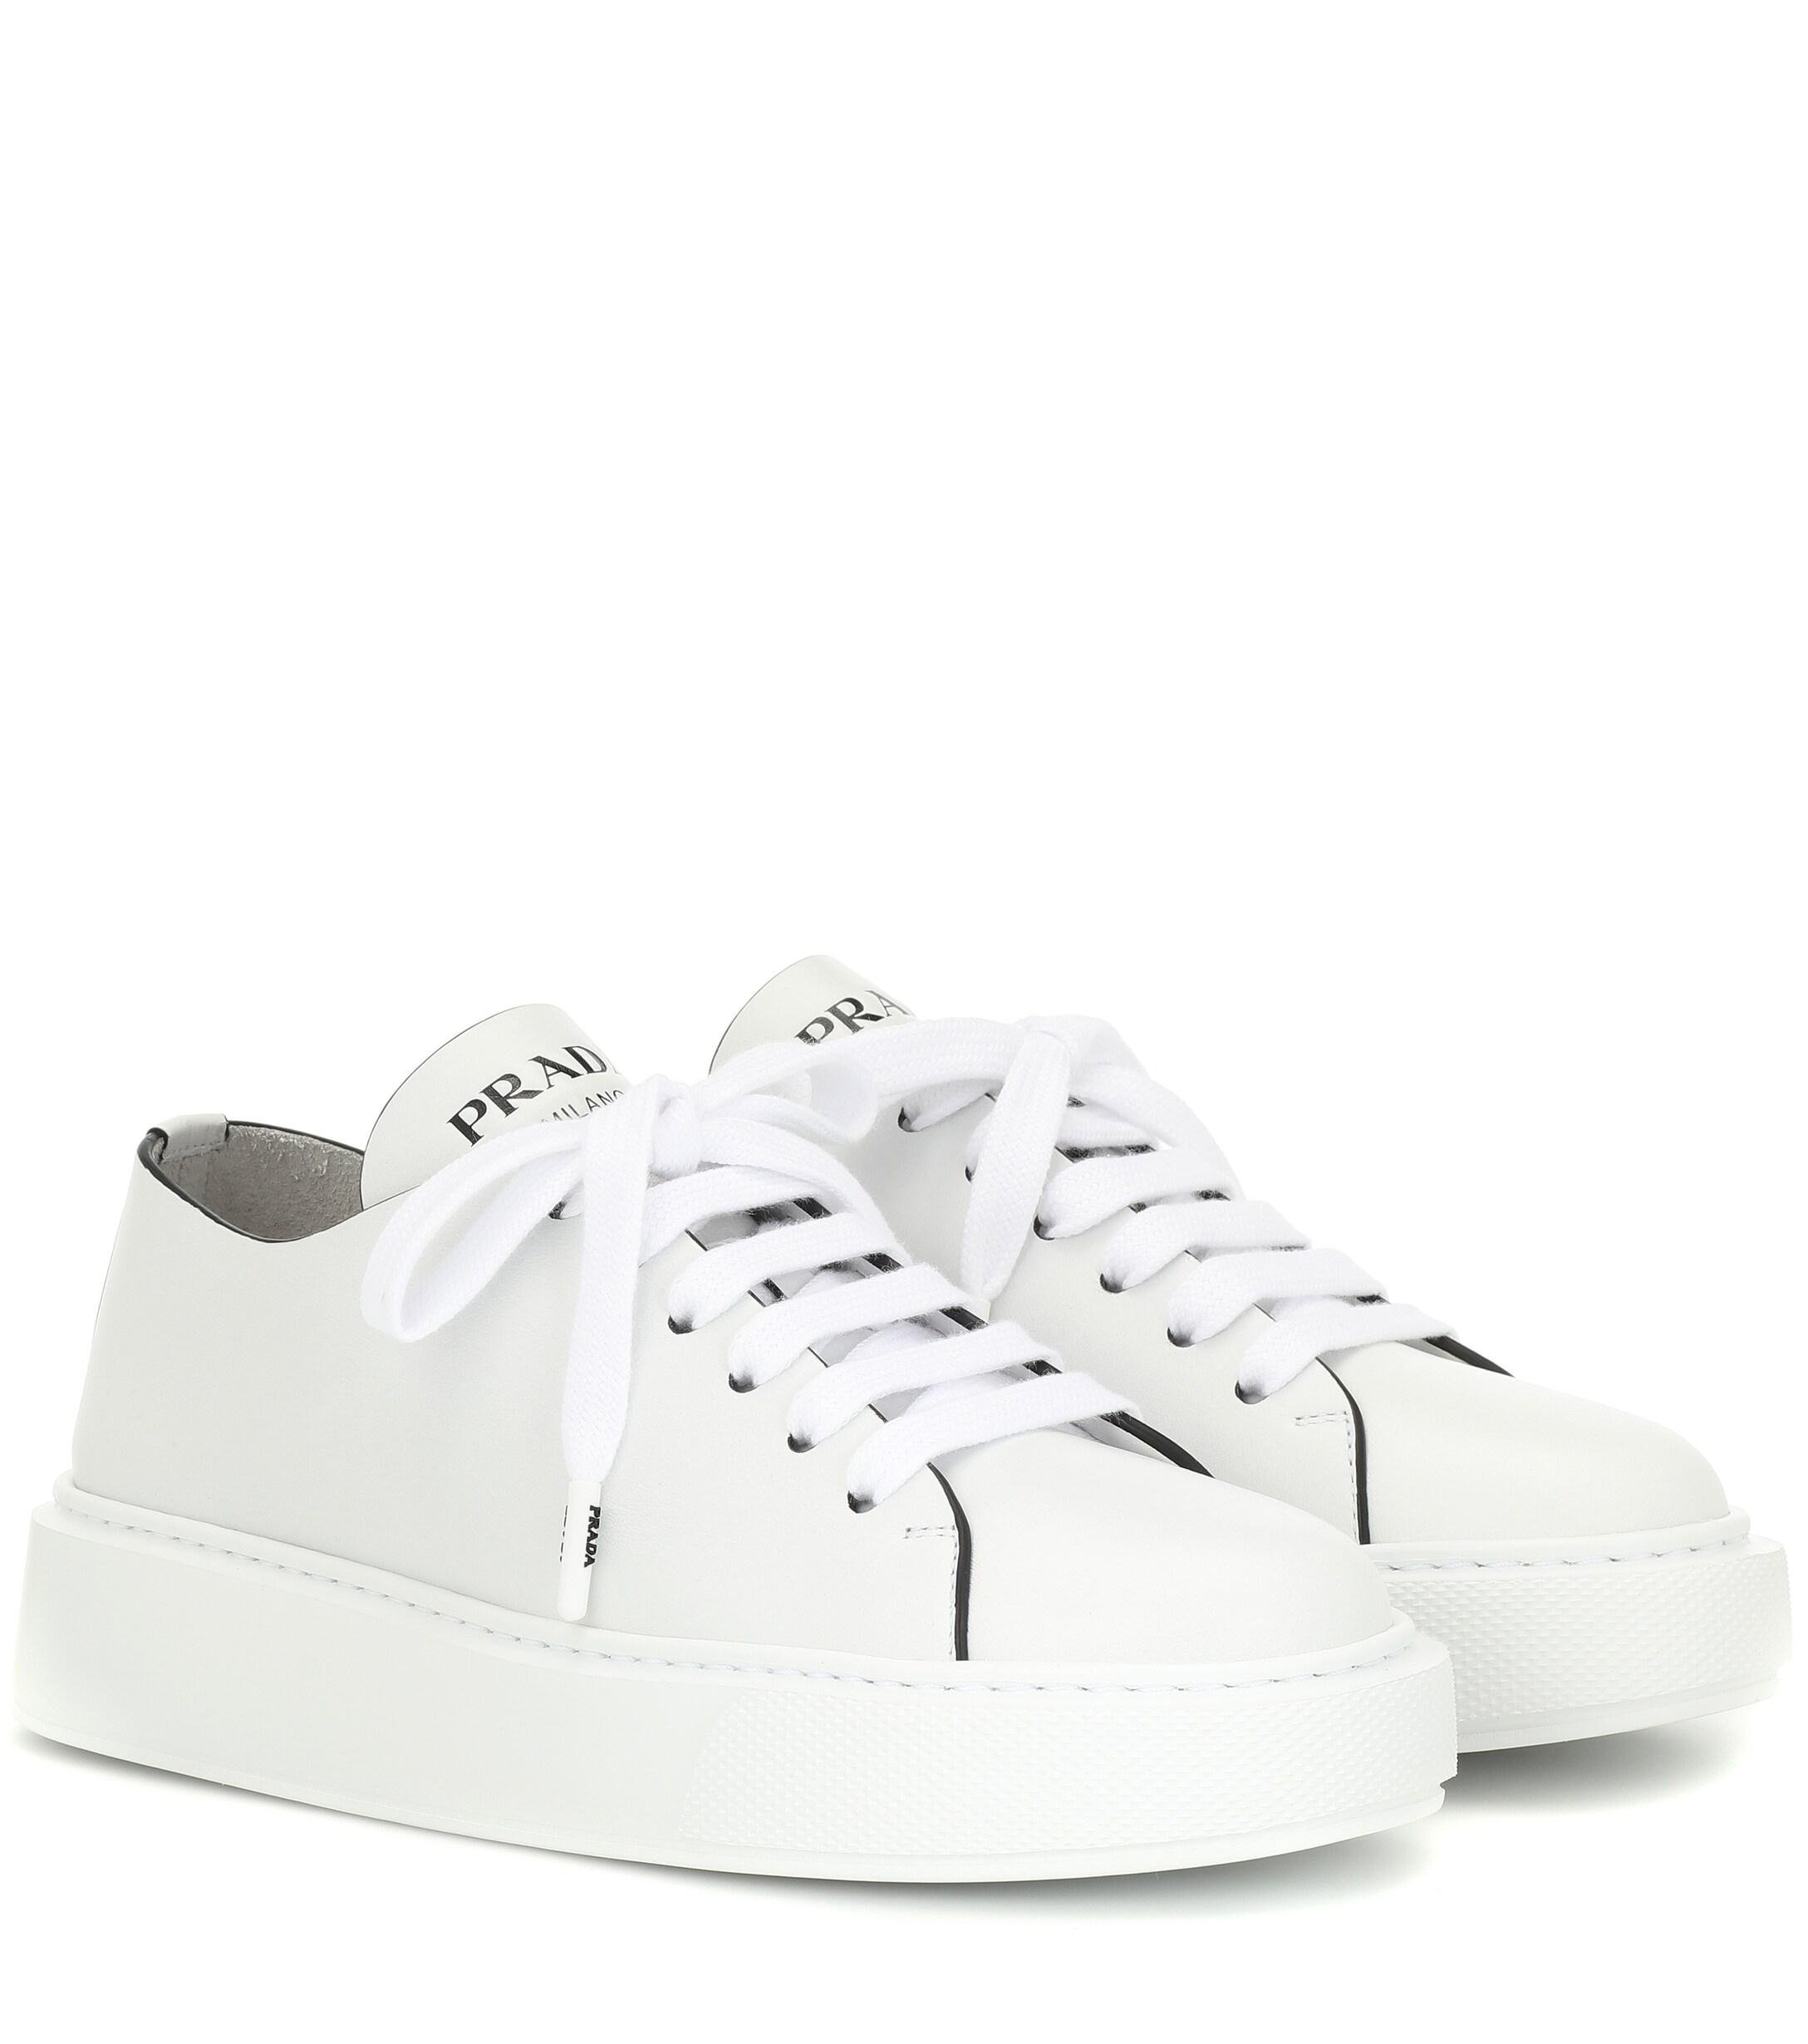 Prada Leather Sneakers in White - Save 5% - Lyst